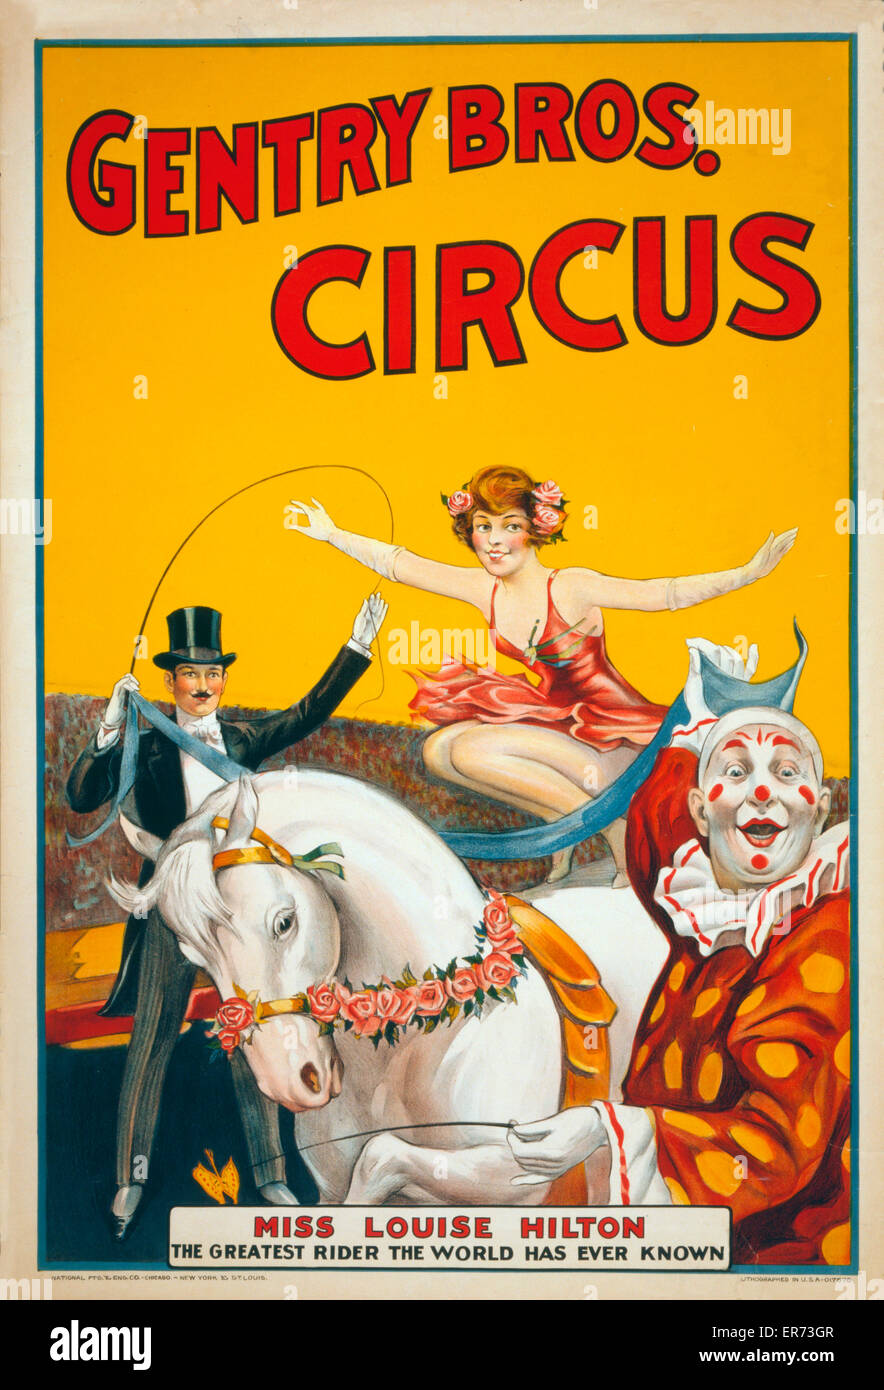 Gentry Bros. circus Miss Louise Hilton, the greatest rider the world has ever known . Circus poster showing Louise Hilton perched on a white horse, about to leap over a scarf held by a clown and a ringmaster. Date between 1920 and 1940. Stock Photo